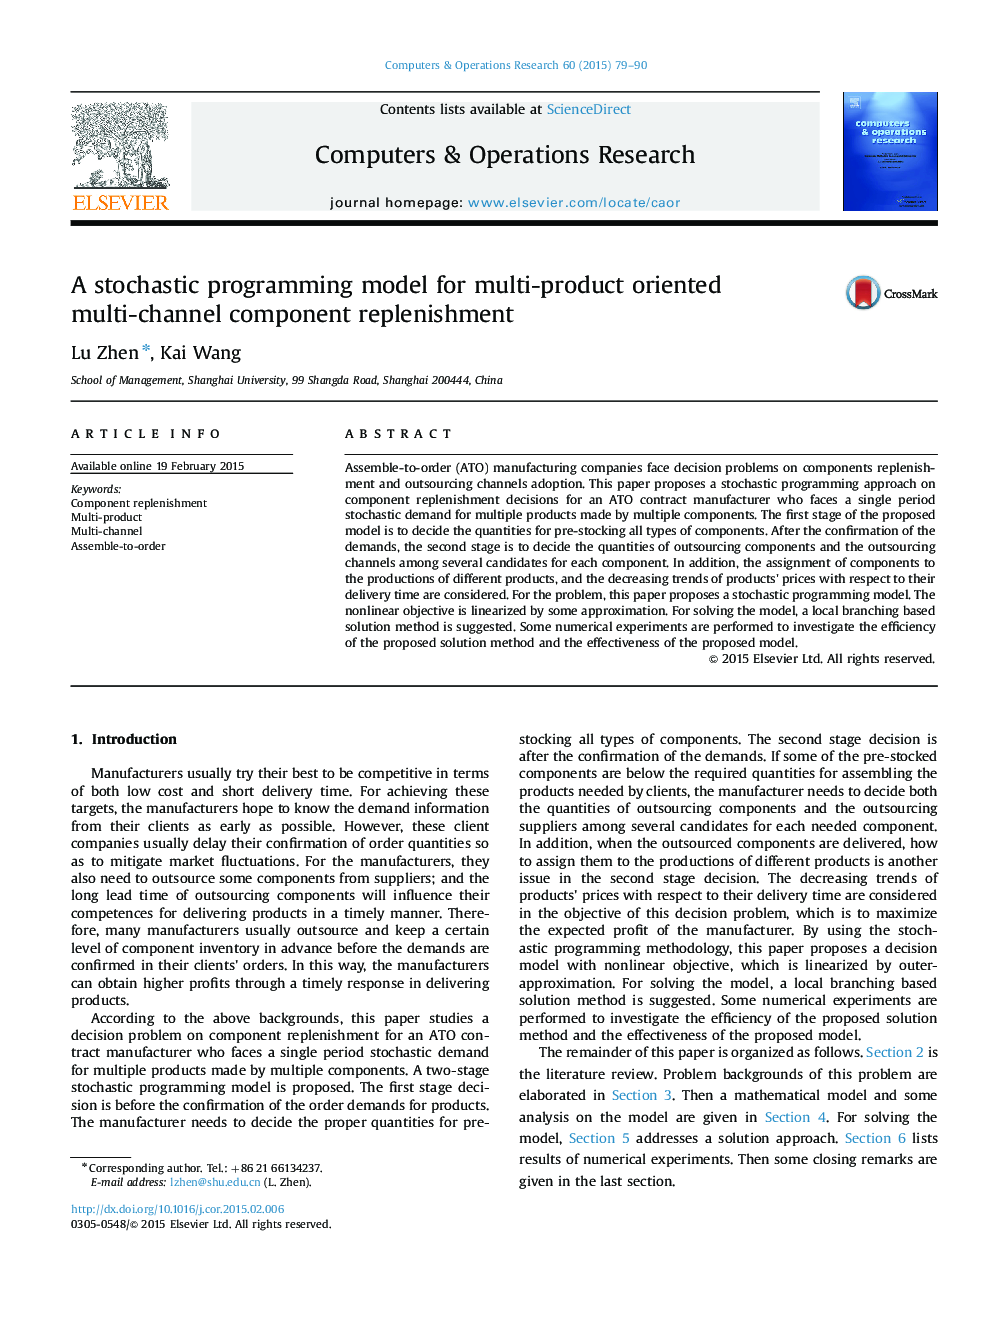 A stochastic programming model for multi-product oriented multi-channel component replenishment